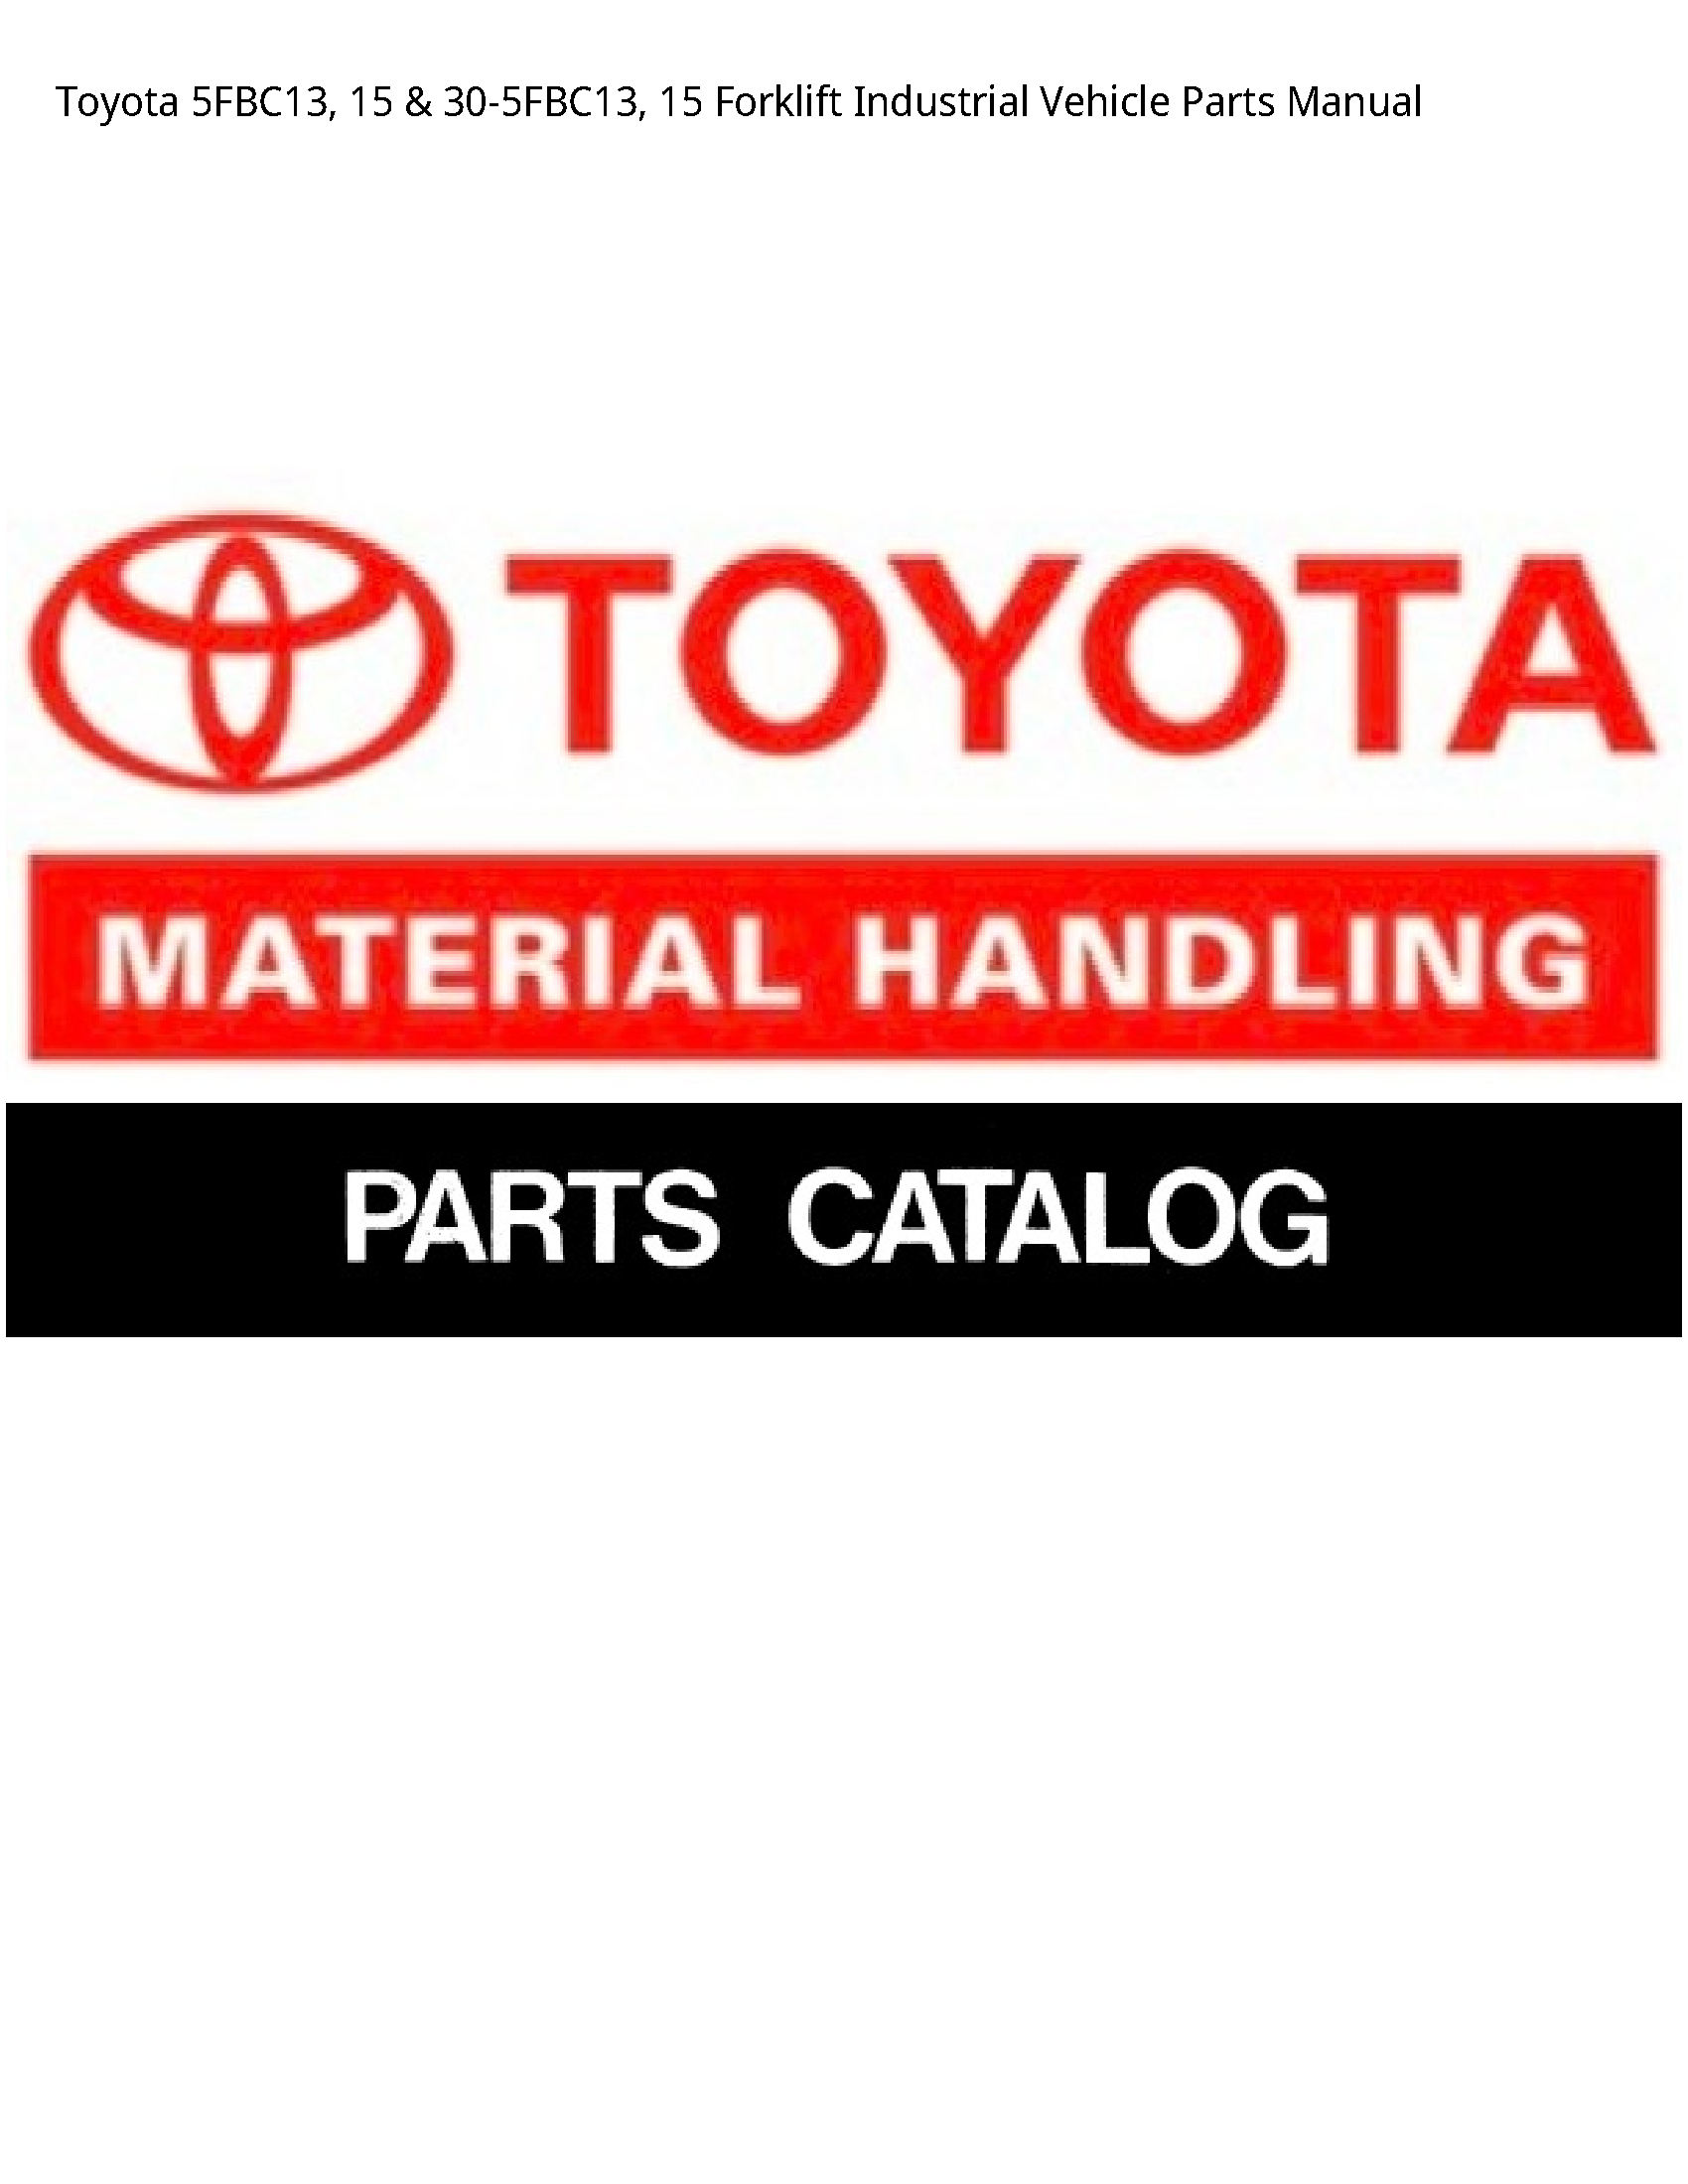 Toyota 5FBC13 Forklift Industrial Vehicle Parts manual